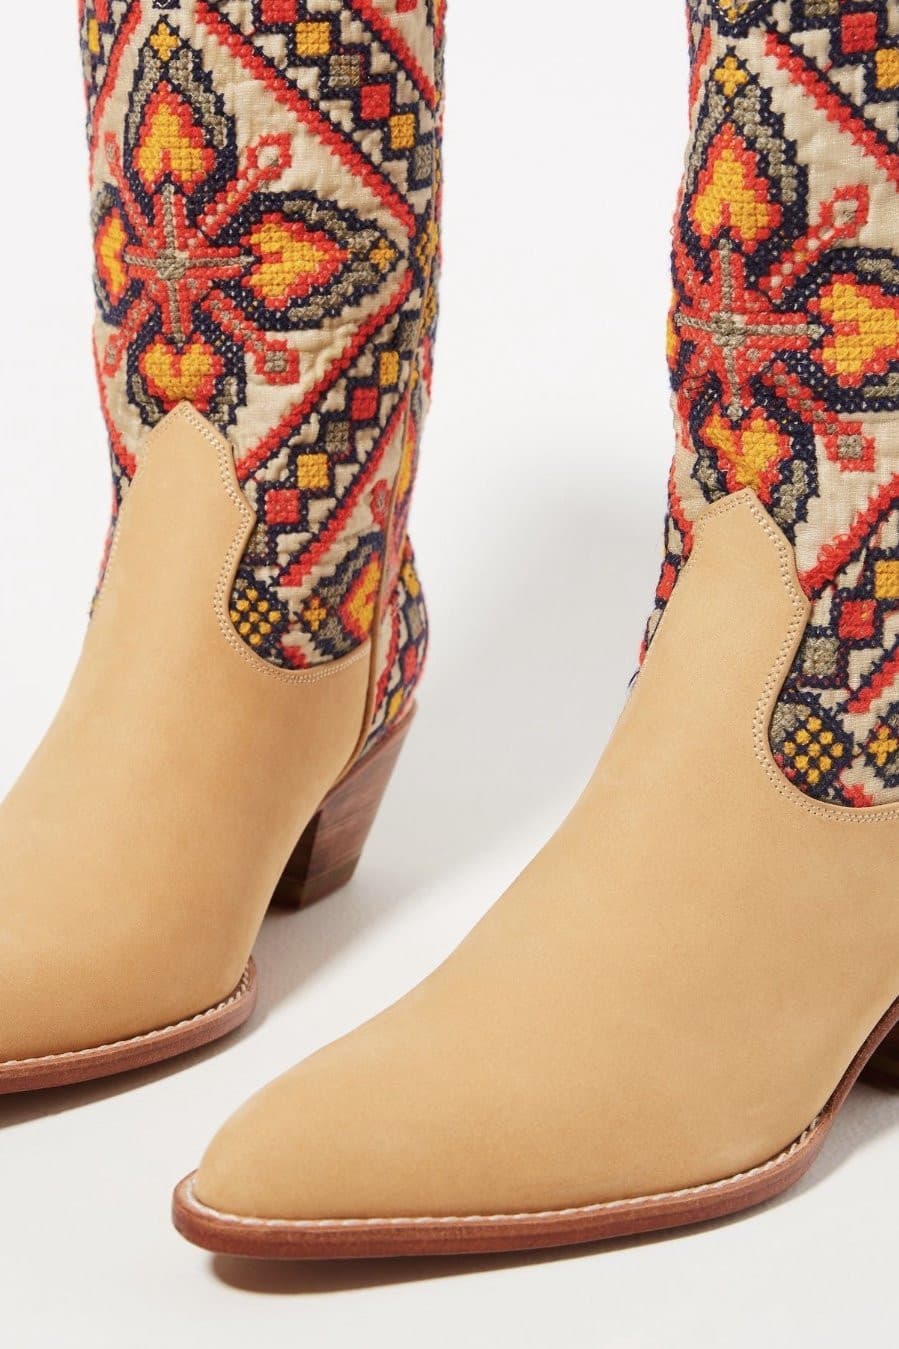 NEEDLESTITCH EMBROIDERED WESTERN BOOTS X ANTHROPOLOGIE - BANGKOK TAILOR CLOTHING STORE - HANDMADE CLOTHING